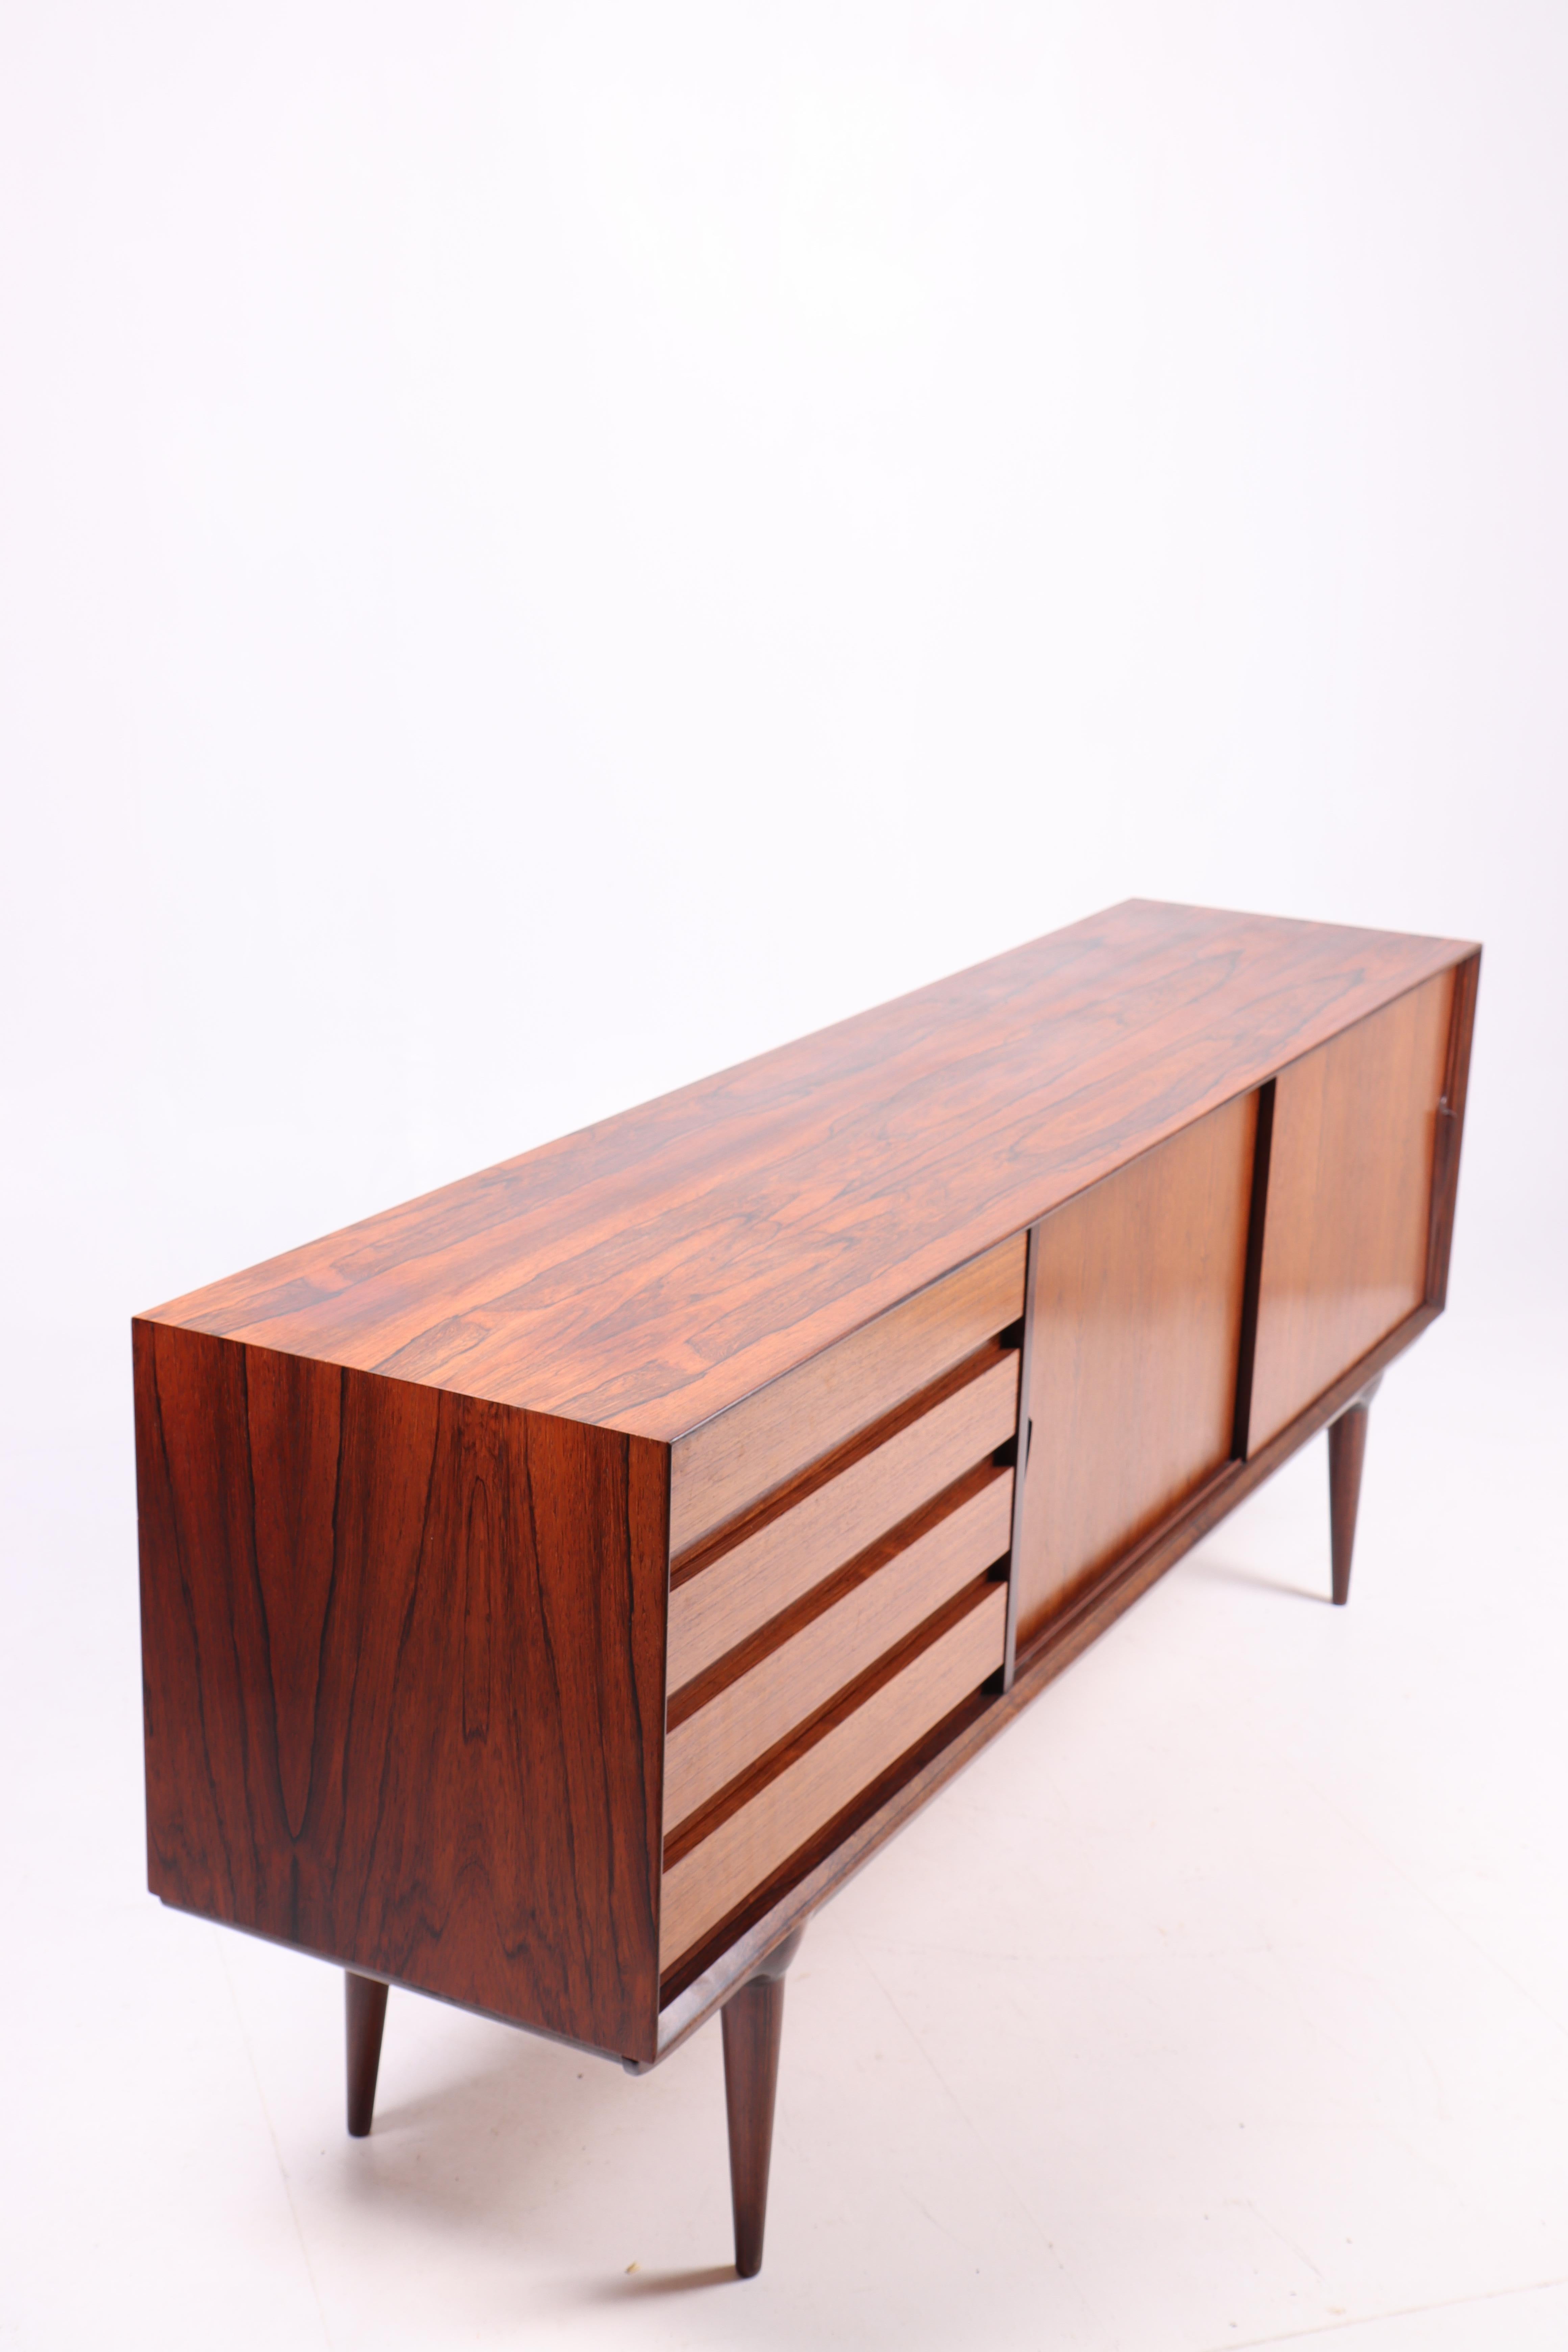 Midcentury Sideboard in Rosewood by Omann Jun, 1950s For Sale 3